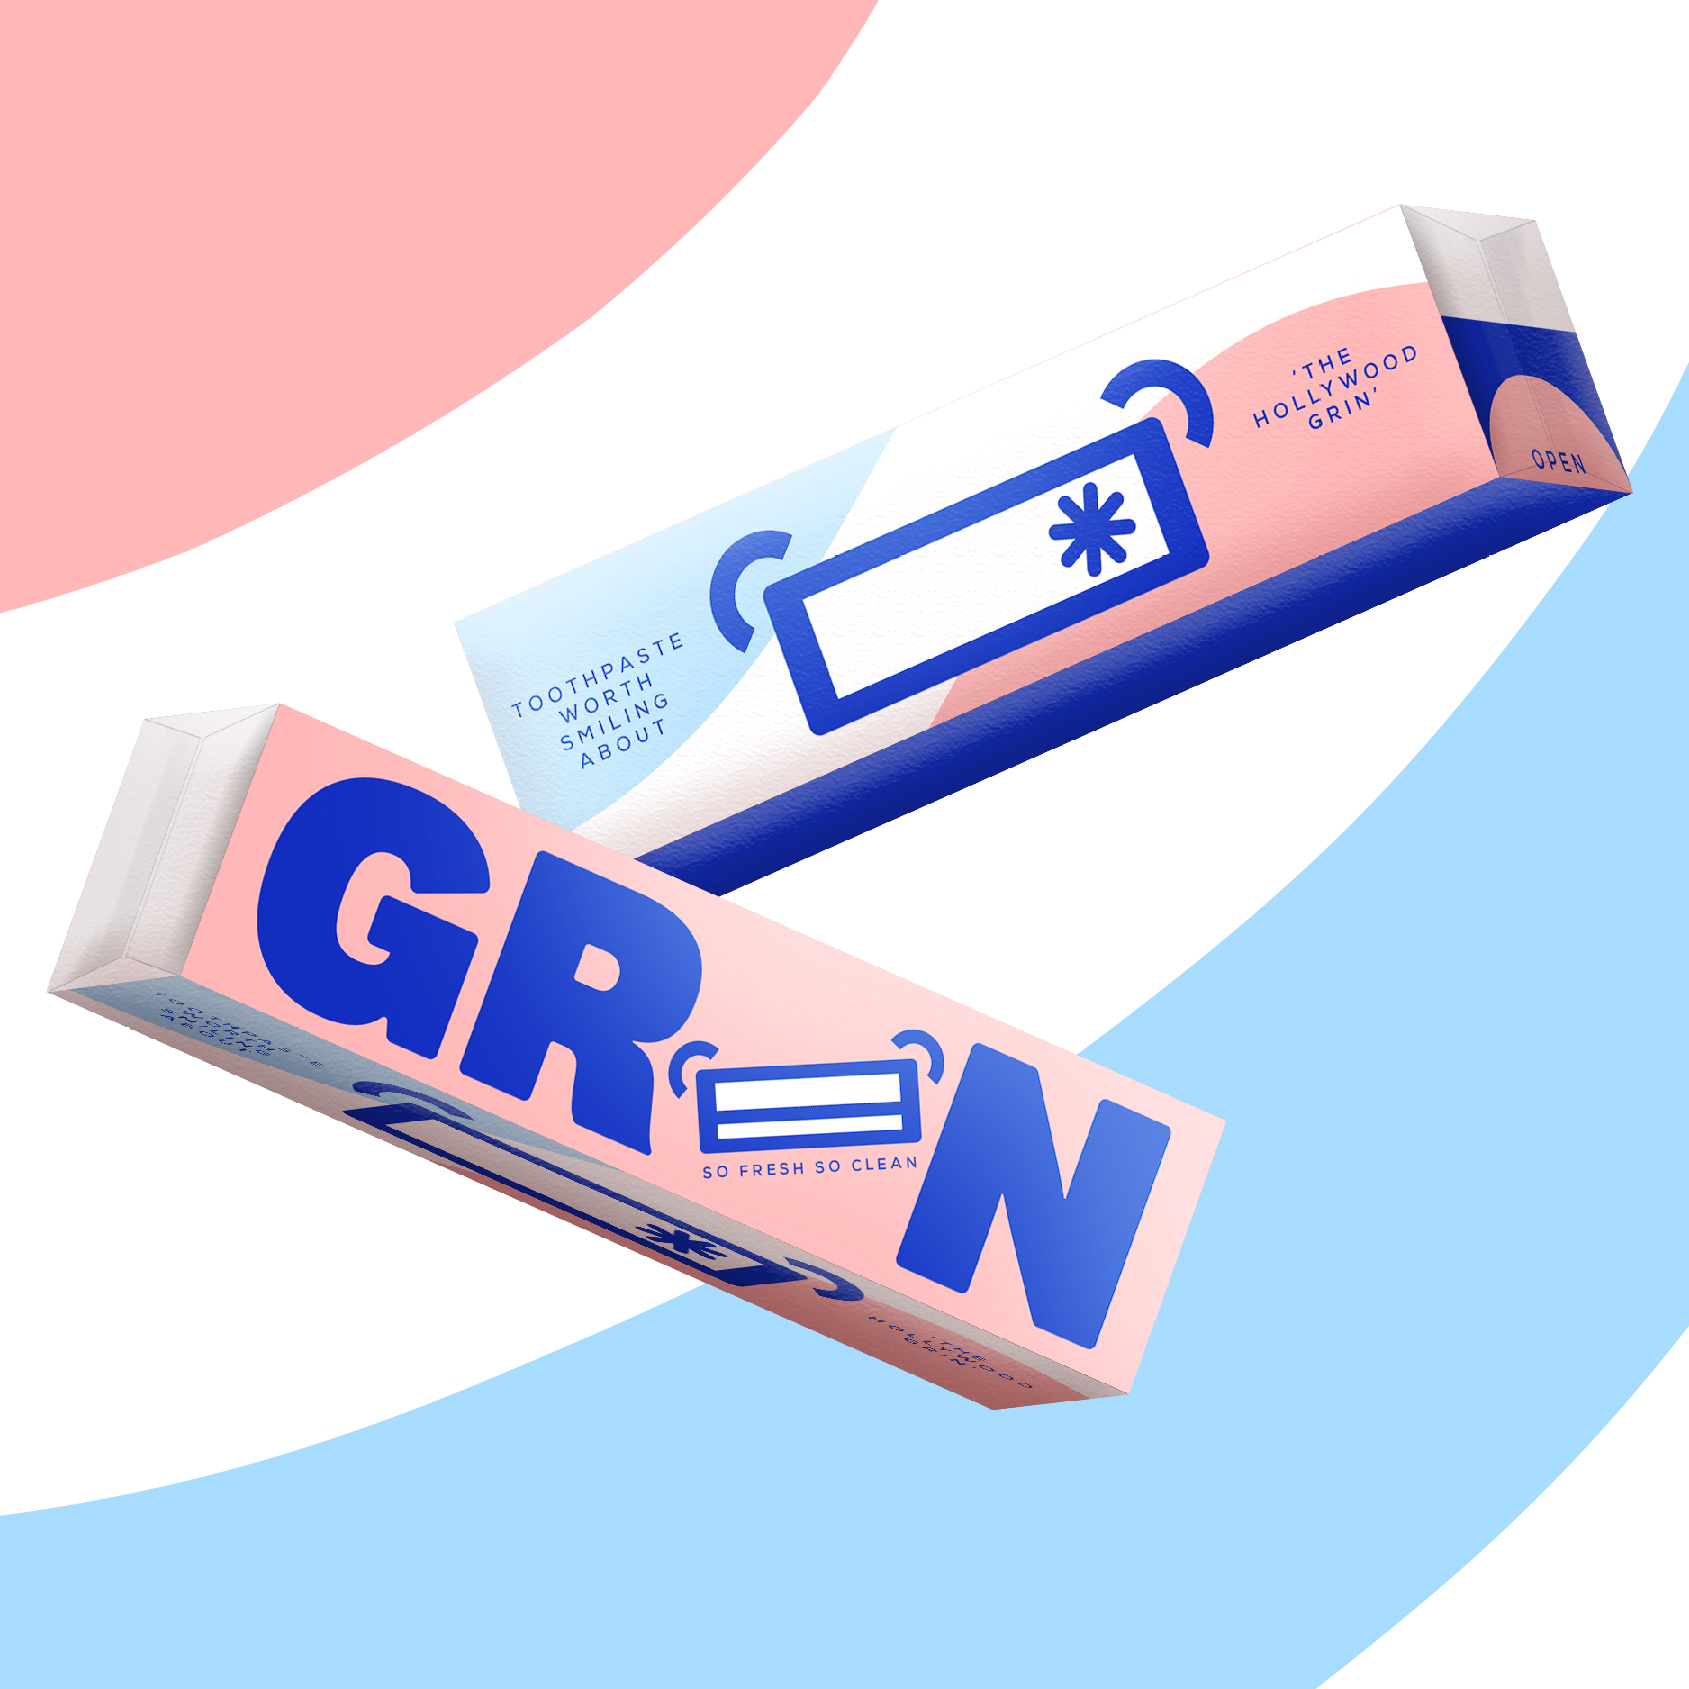 Brand and Packaging Concept for a New Feel-Good Toothpaste